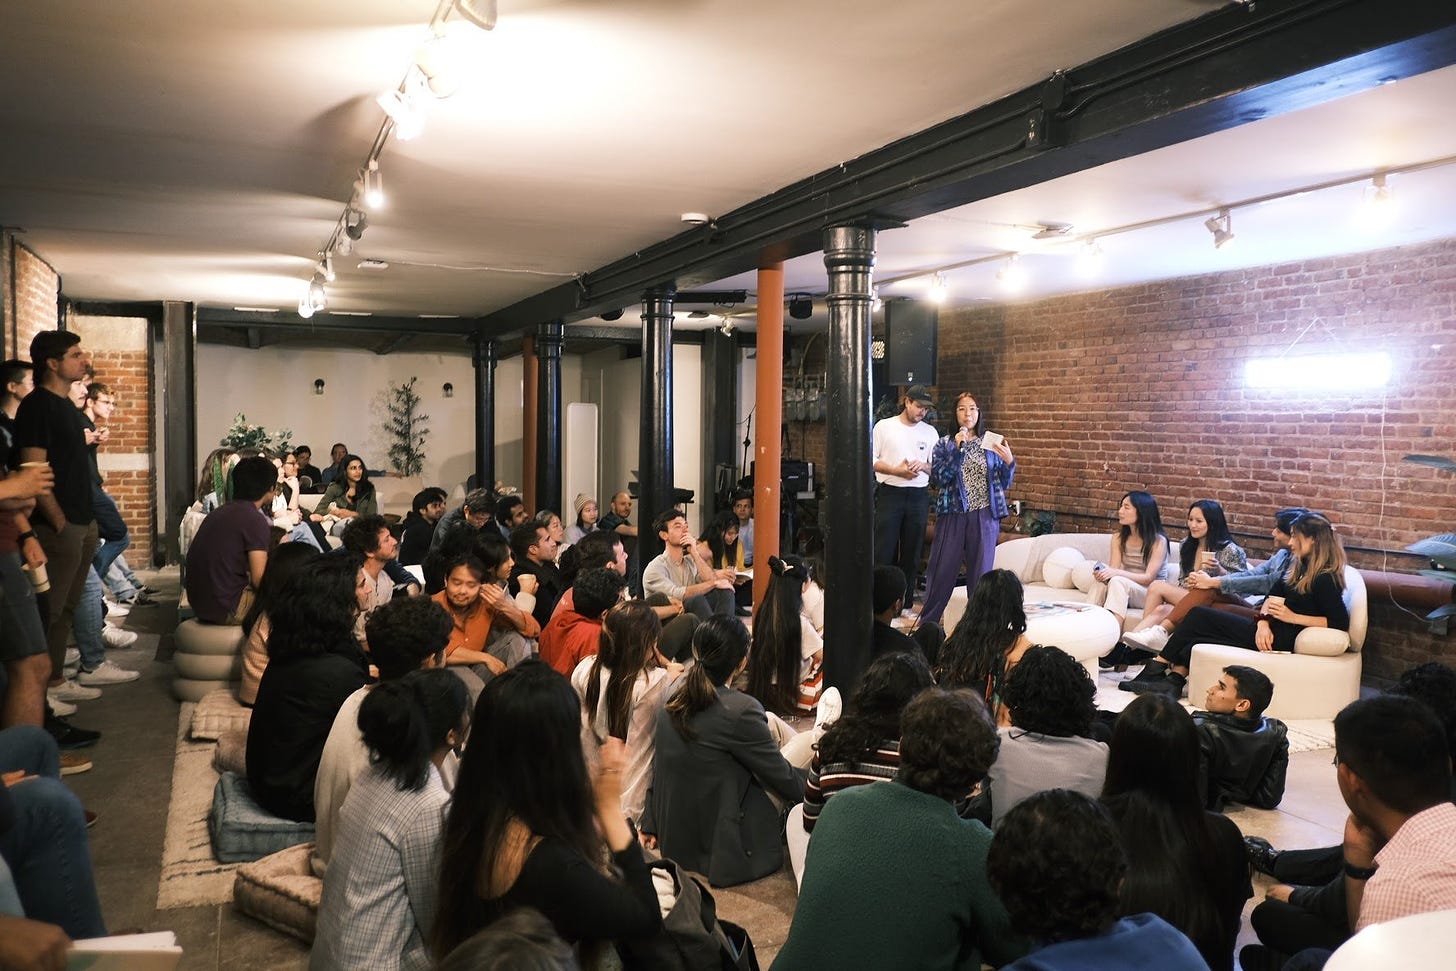 A crowd is gathered in an open room. Most people are sitting on cushions in the floor and some people are standing against the back wall. Six people are facing the audience at the front of the room. One person is speaking into a microphone.